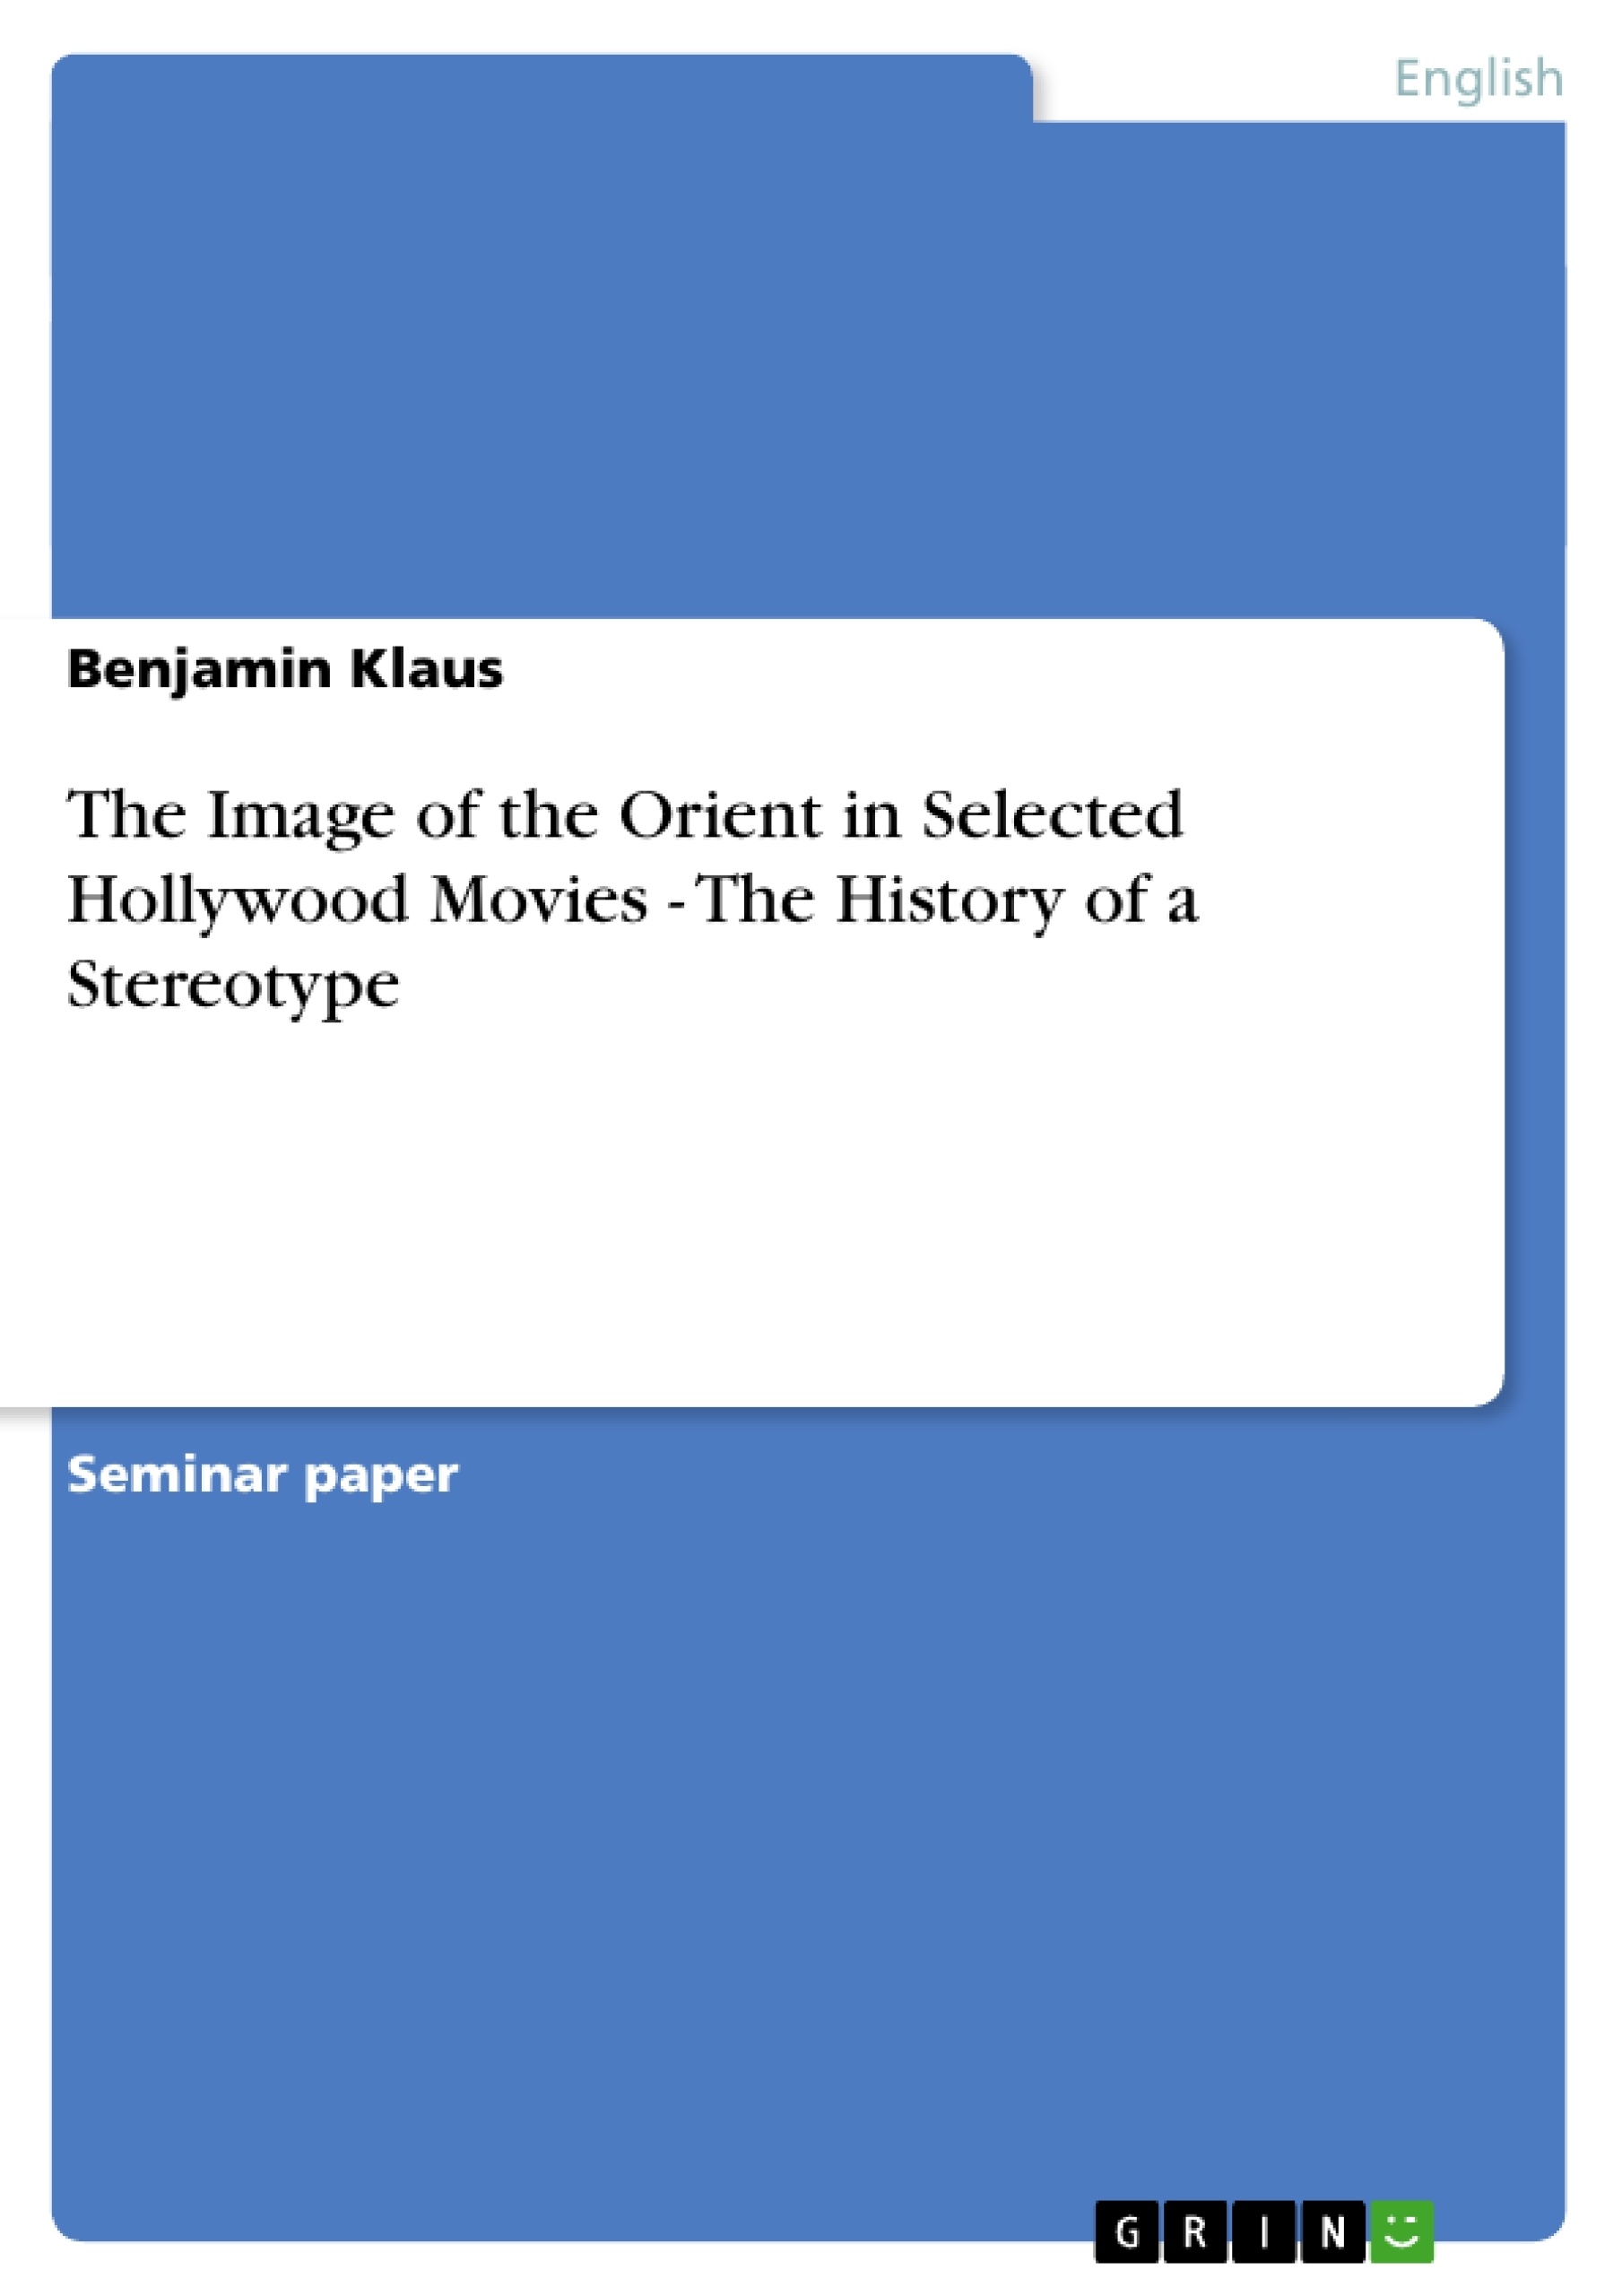 Title: The Image of the Orient in Selected Hollywood Movies - The History of a Stereotype